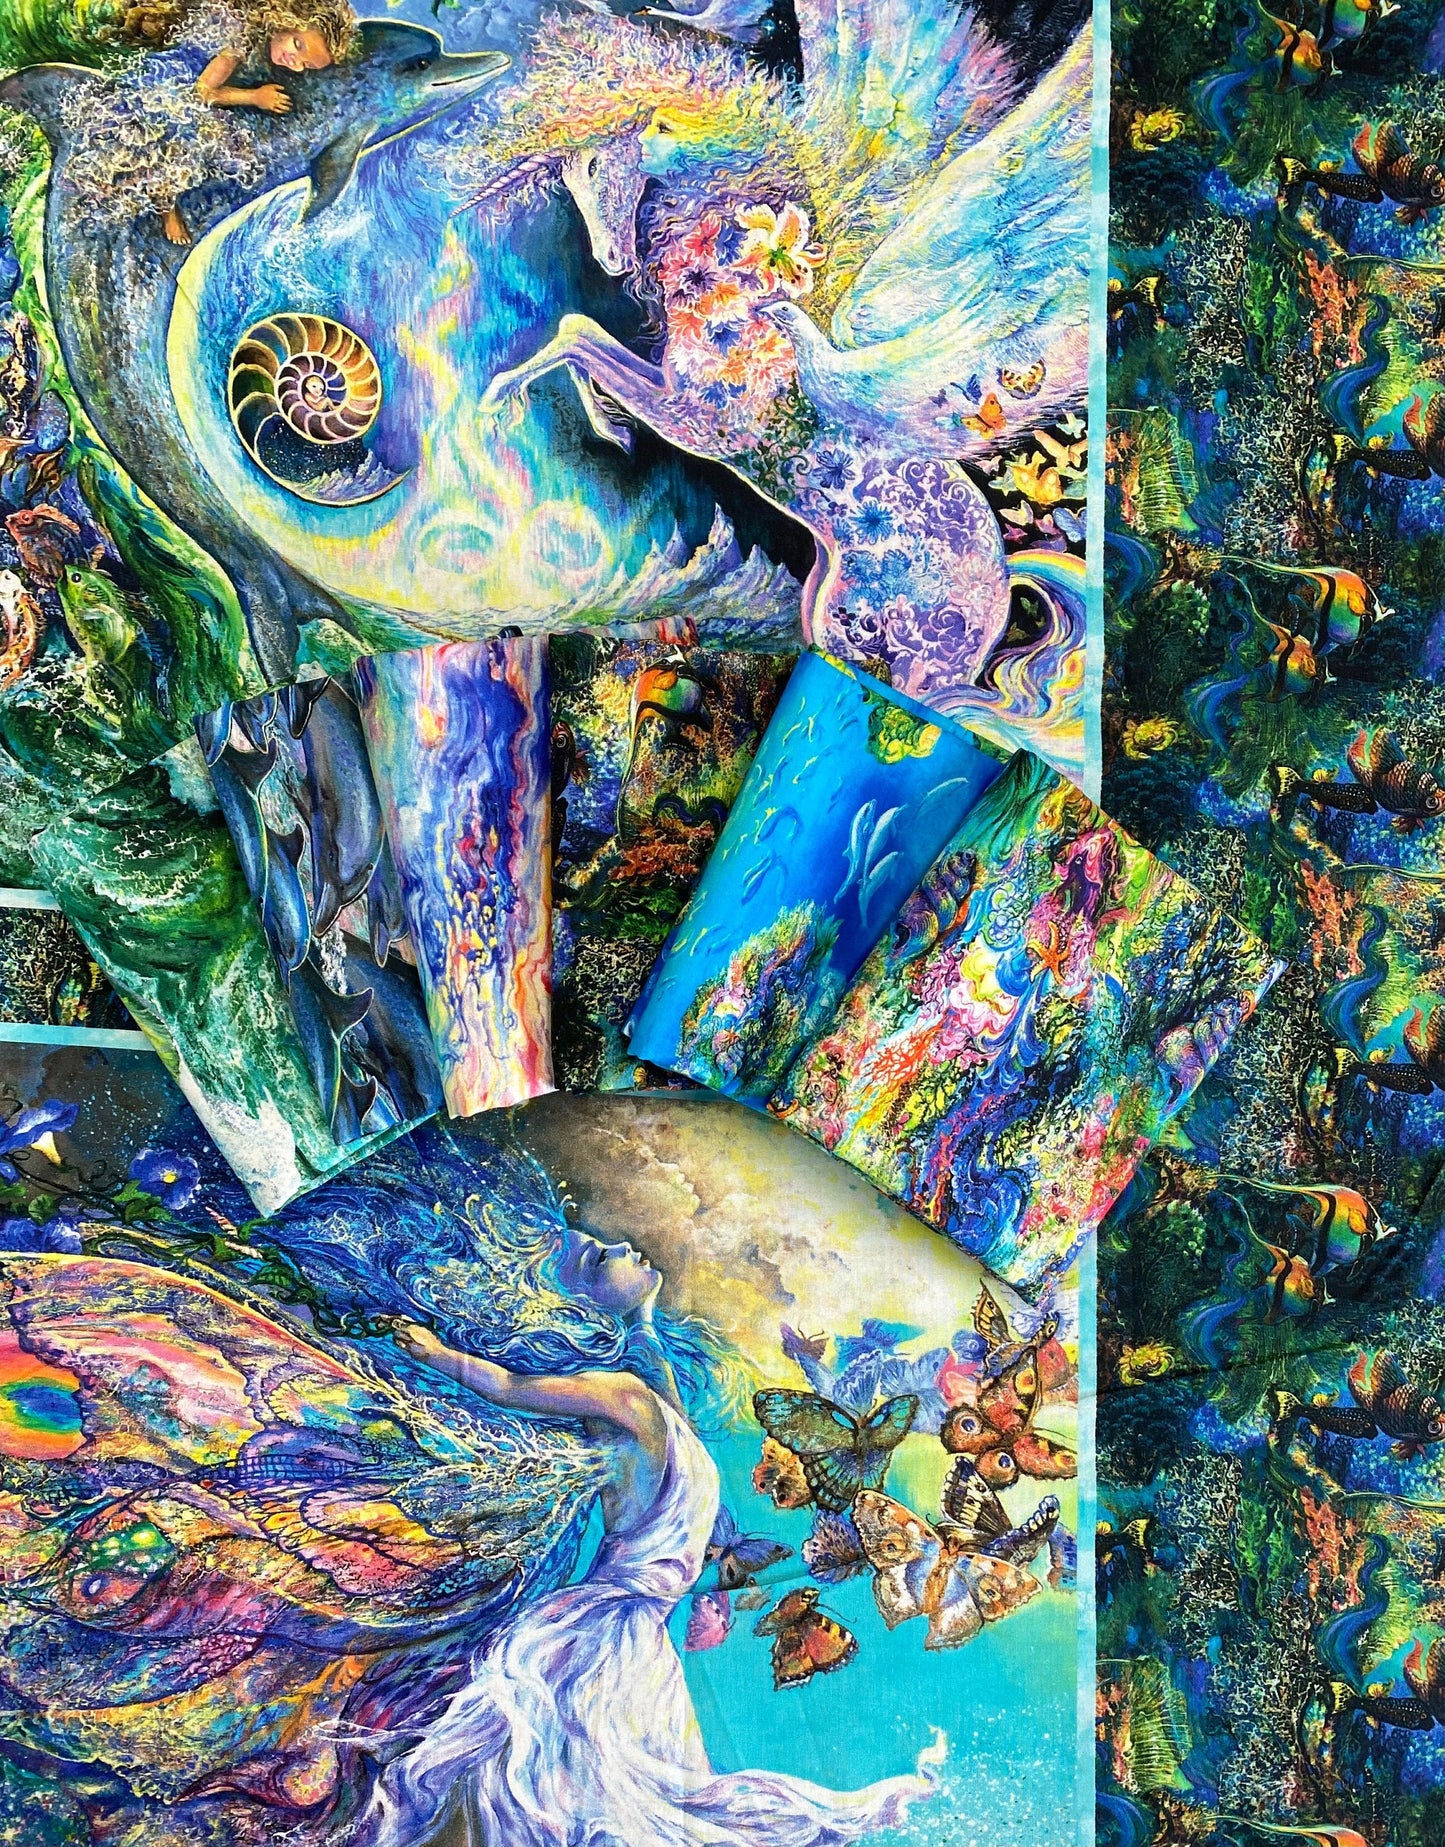 Call of the Sea by Josephine Wall Fish 17989-MLT Digitally Printed Cotton Woven Fabric